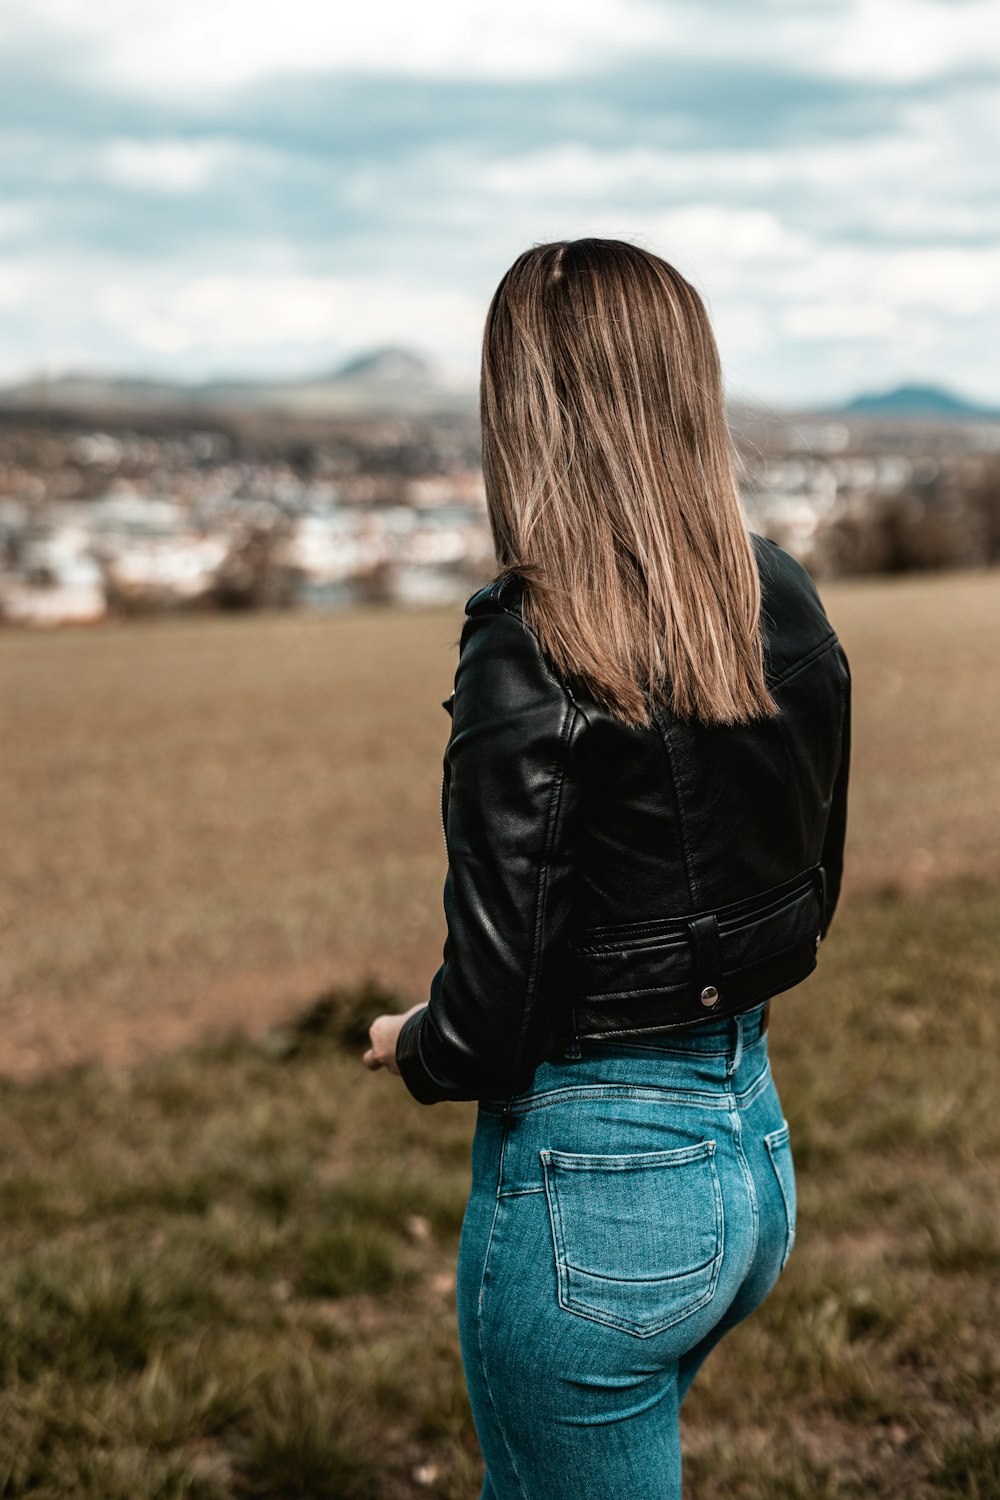 Woman in black jacket and blue denim jeans standing on green grass field  during daytime photo – Free Jeans Image on Unsplash